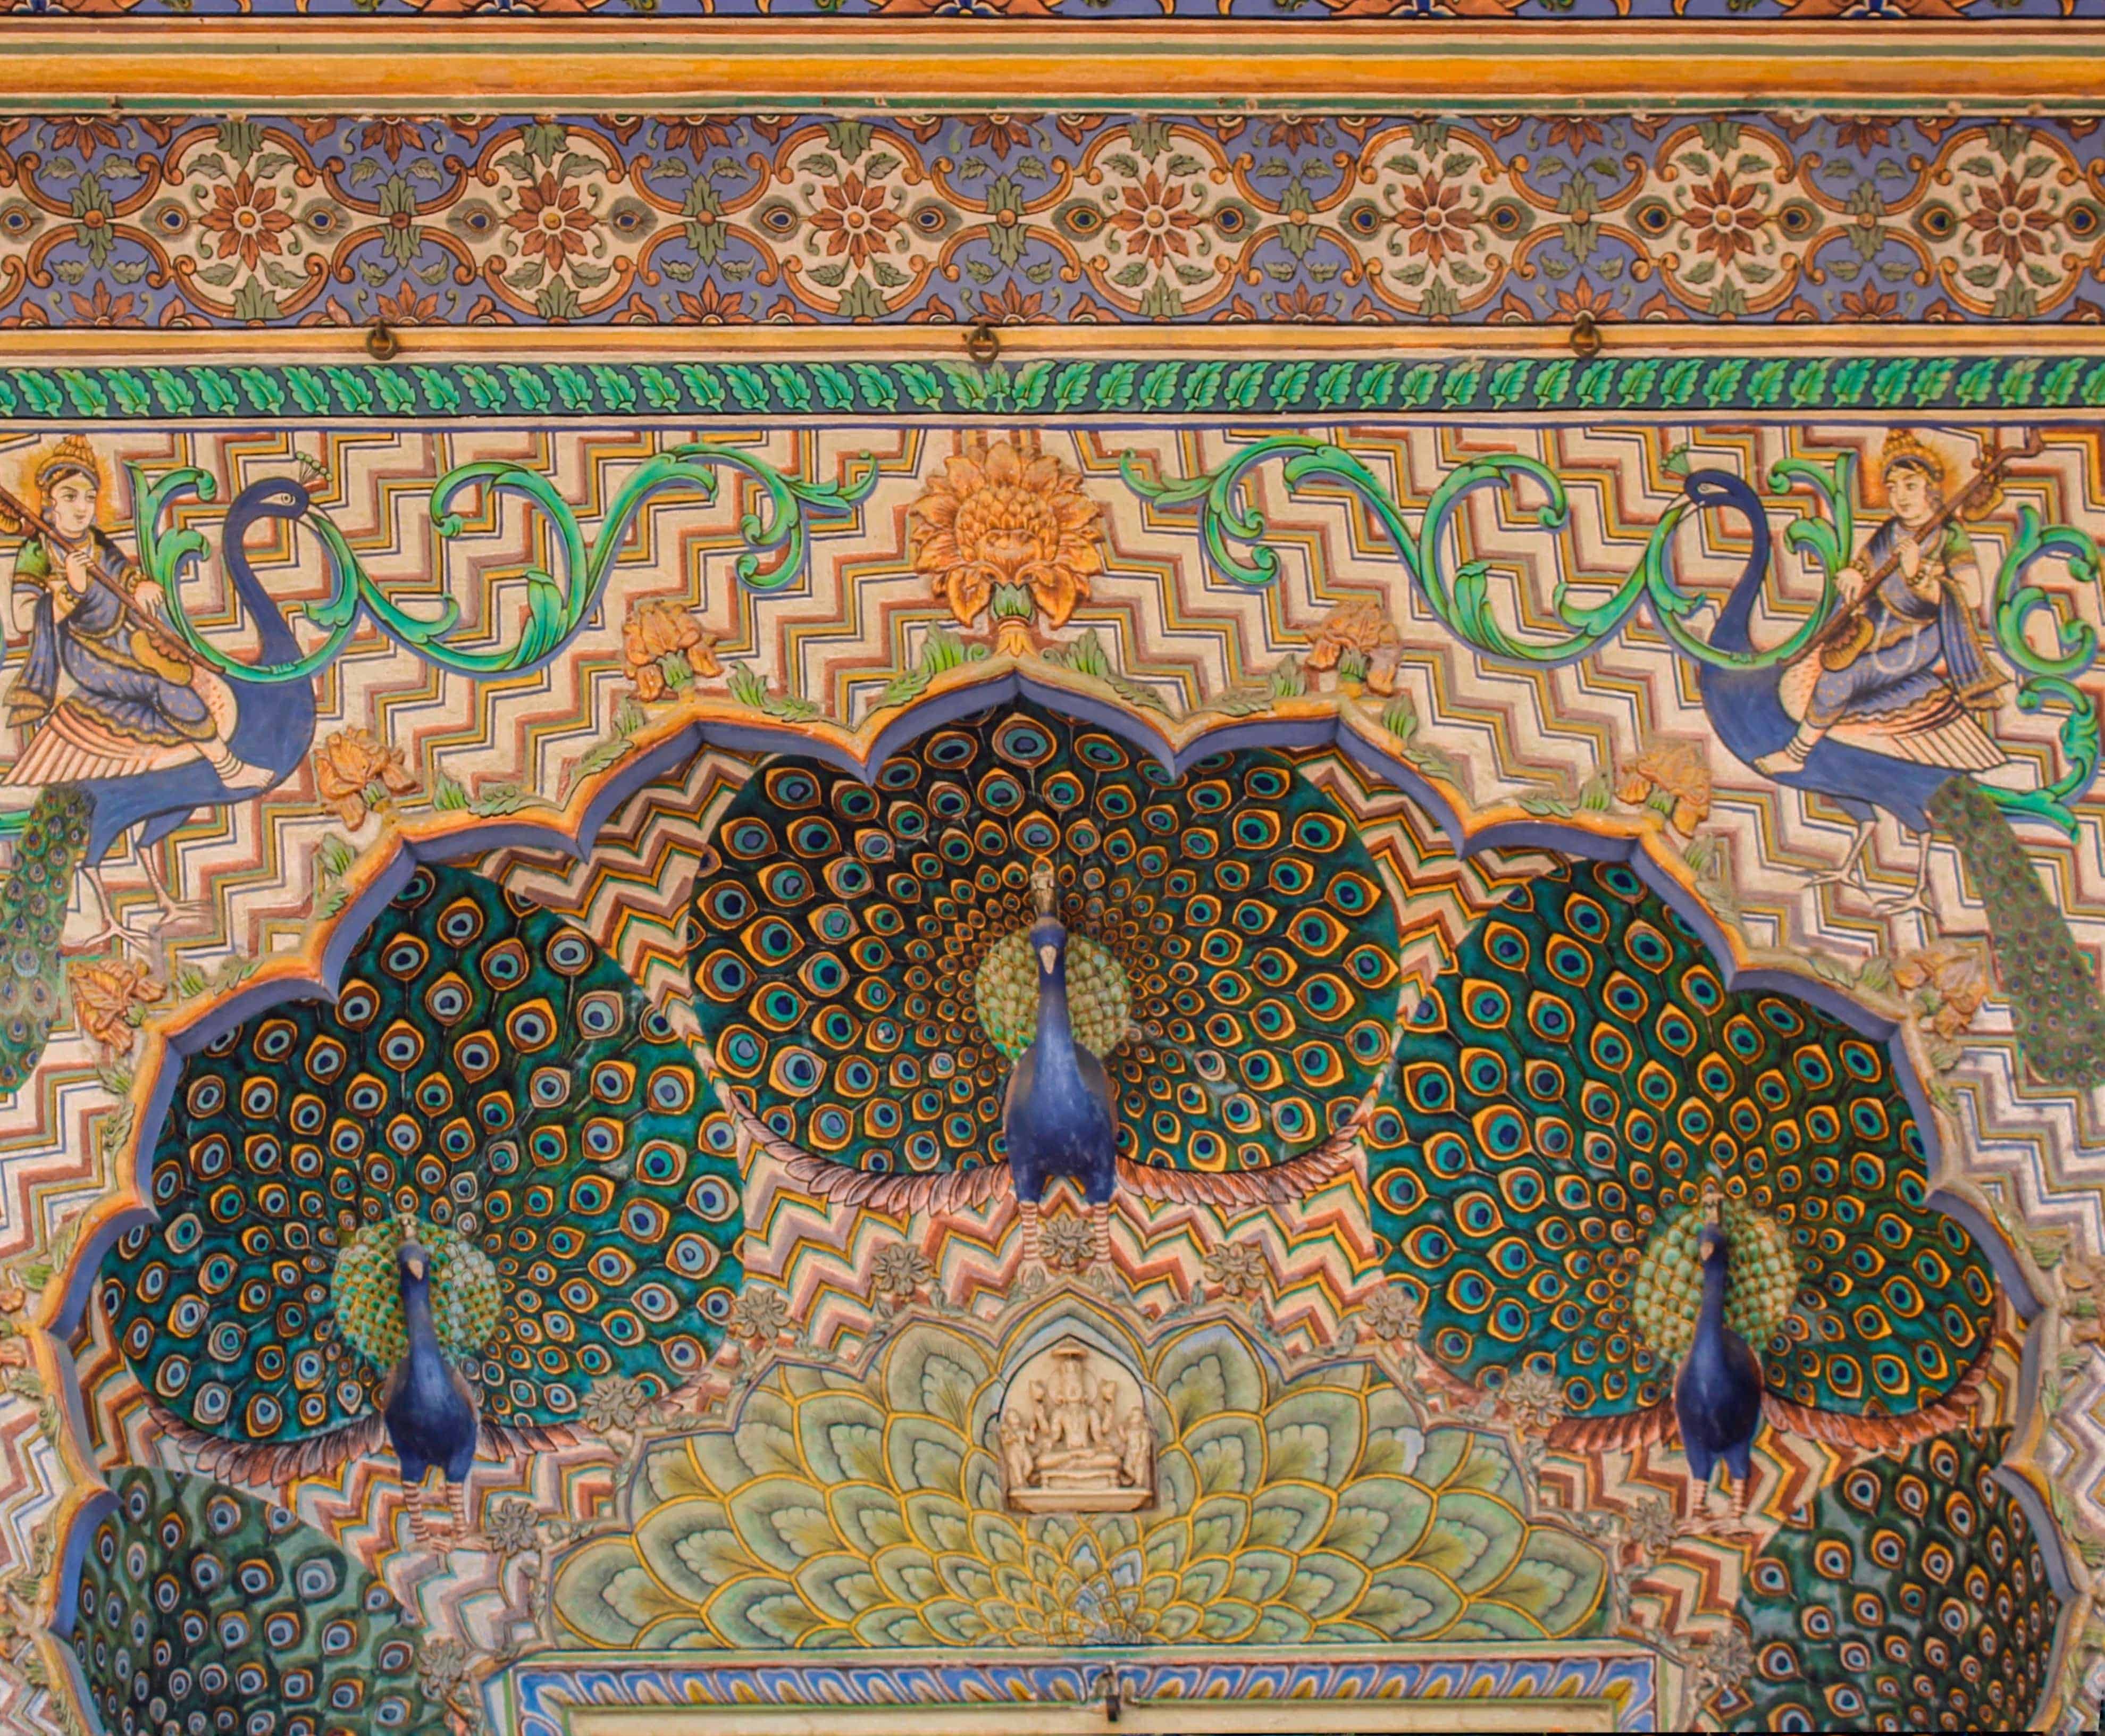 The enticing peacock murals